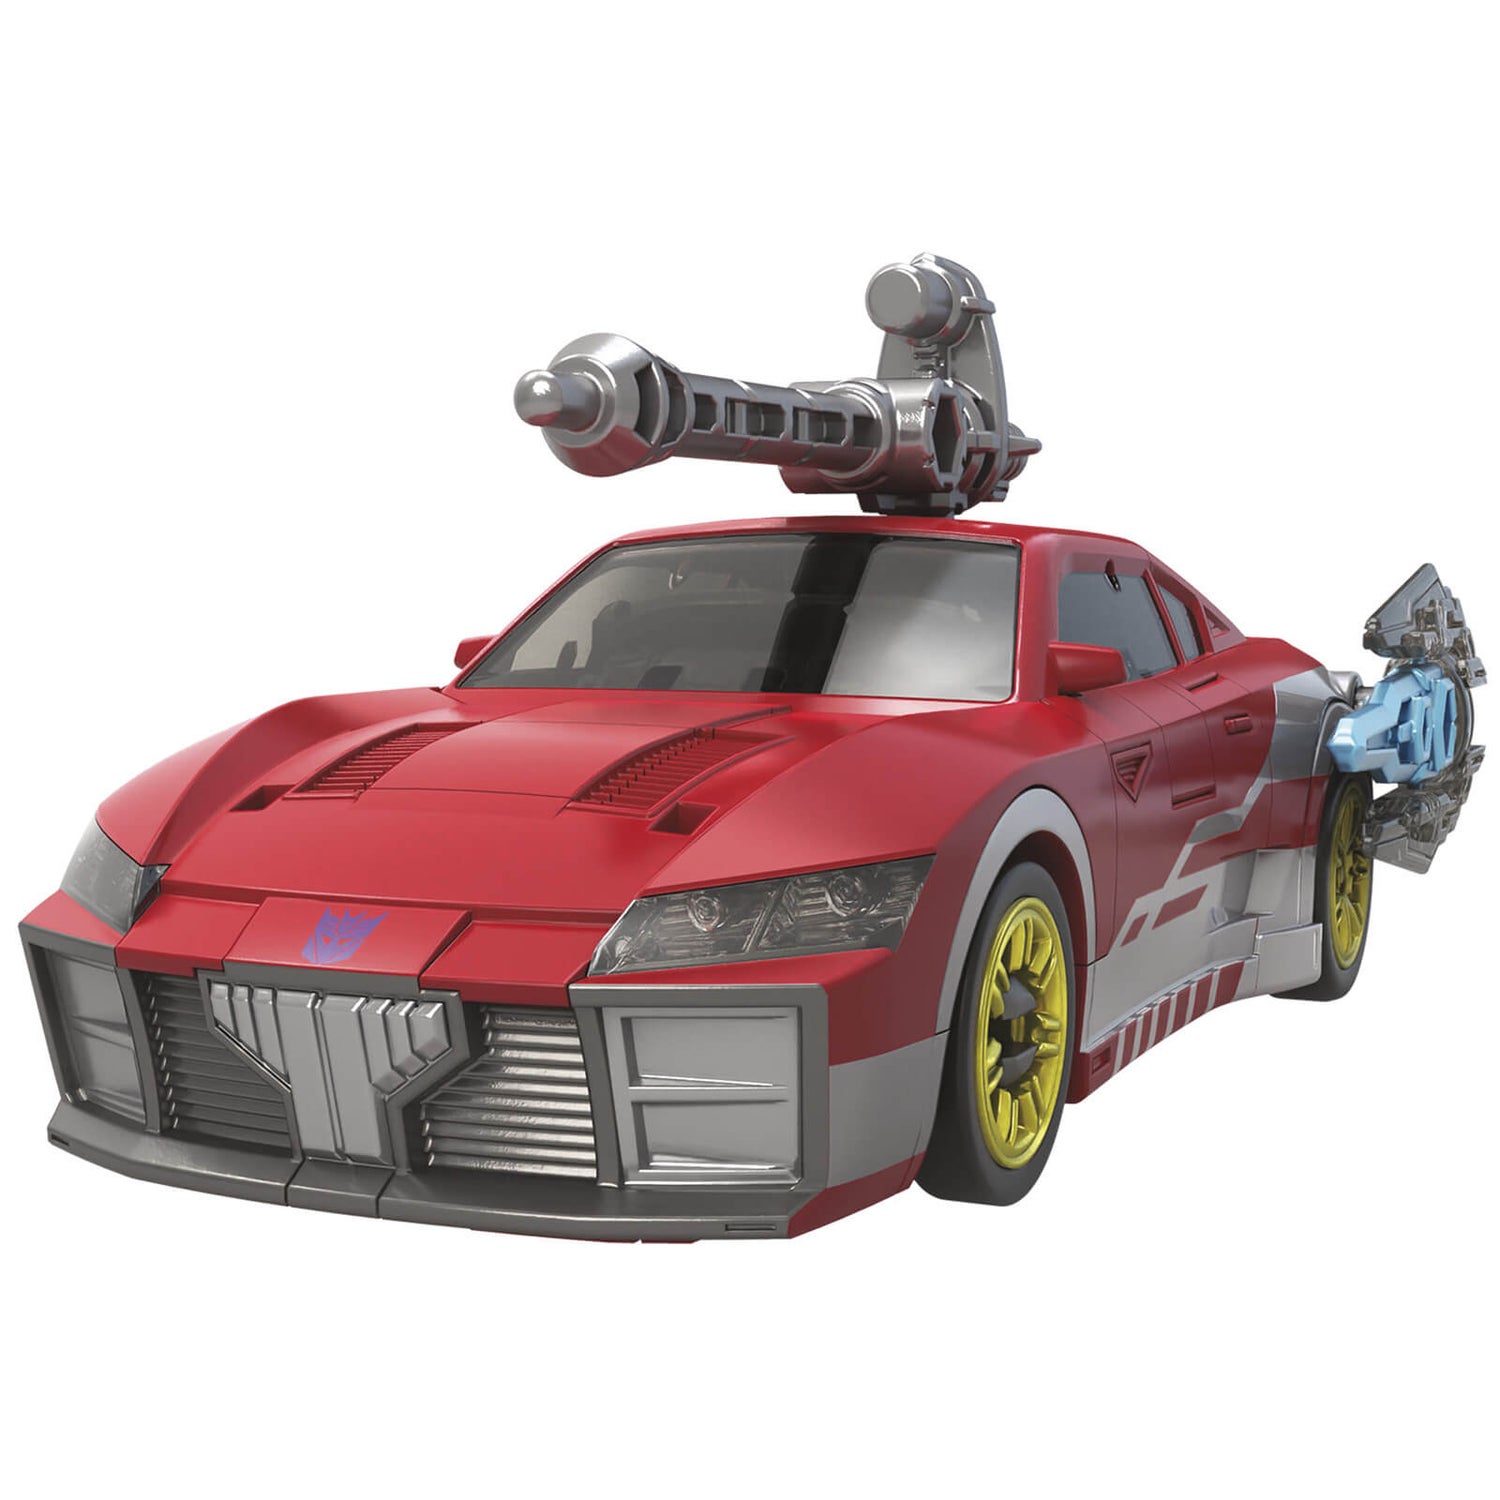 Transformers Legacy: Knock-Out by Hasbro